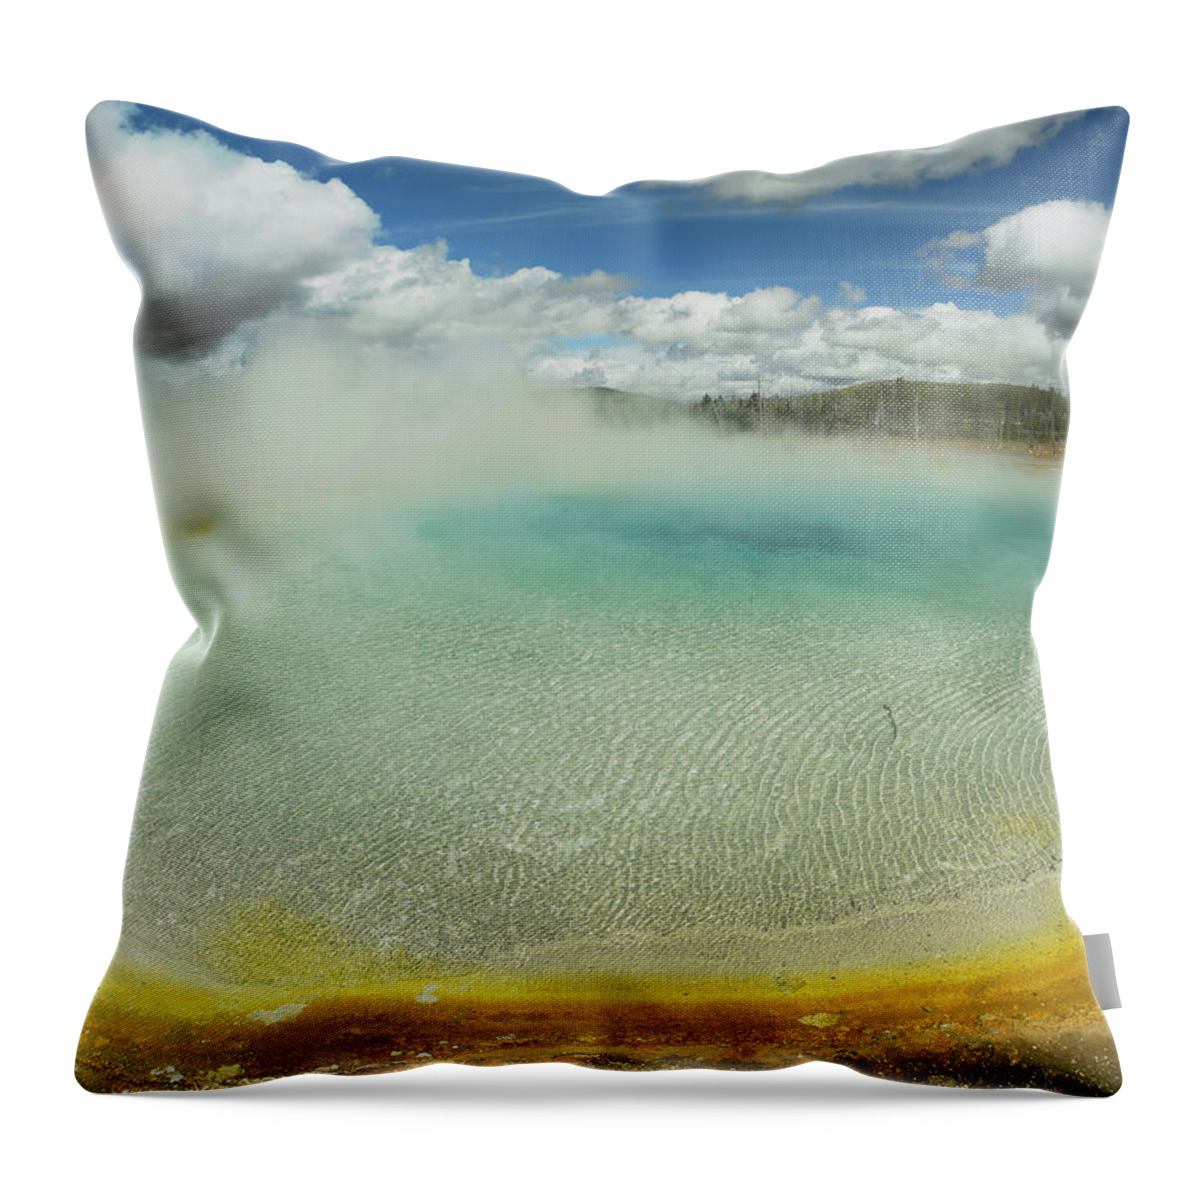 00175157 Throw Pillow featuring the photograph Sunset Lake Yellowstone National Park by Tim Fitzharris